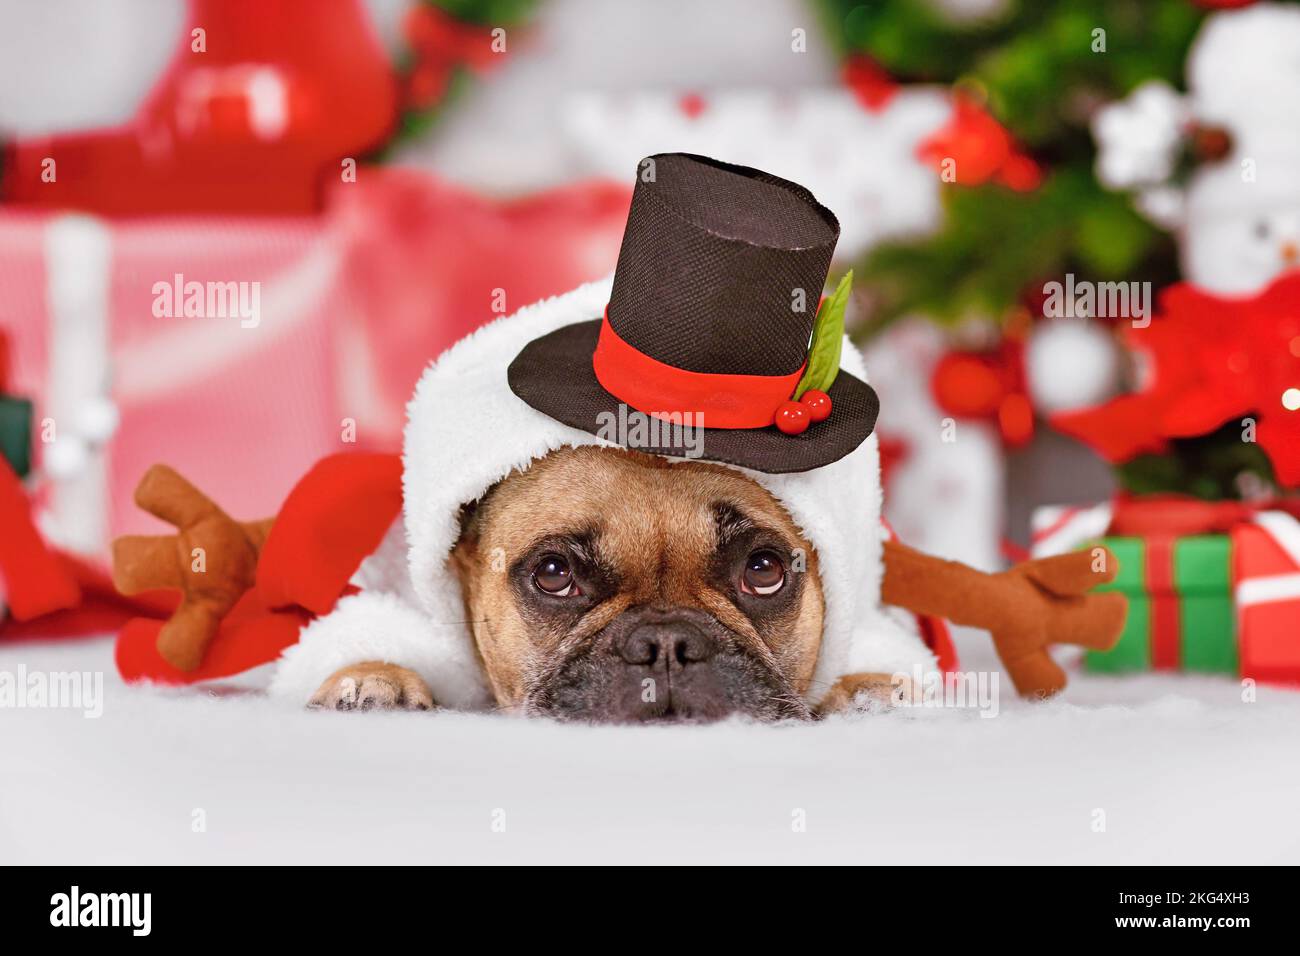 French Bulldog dog wearing funny Snowman hat with top hat in front of seasonal Christmas decoration Stock Photo